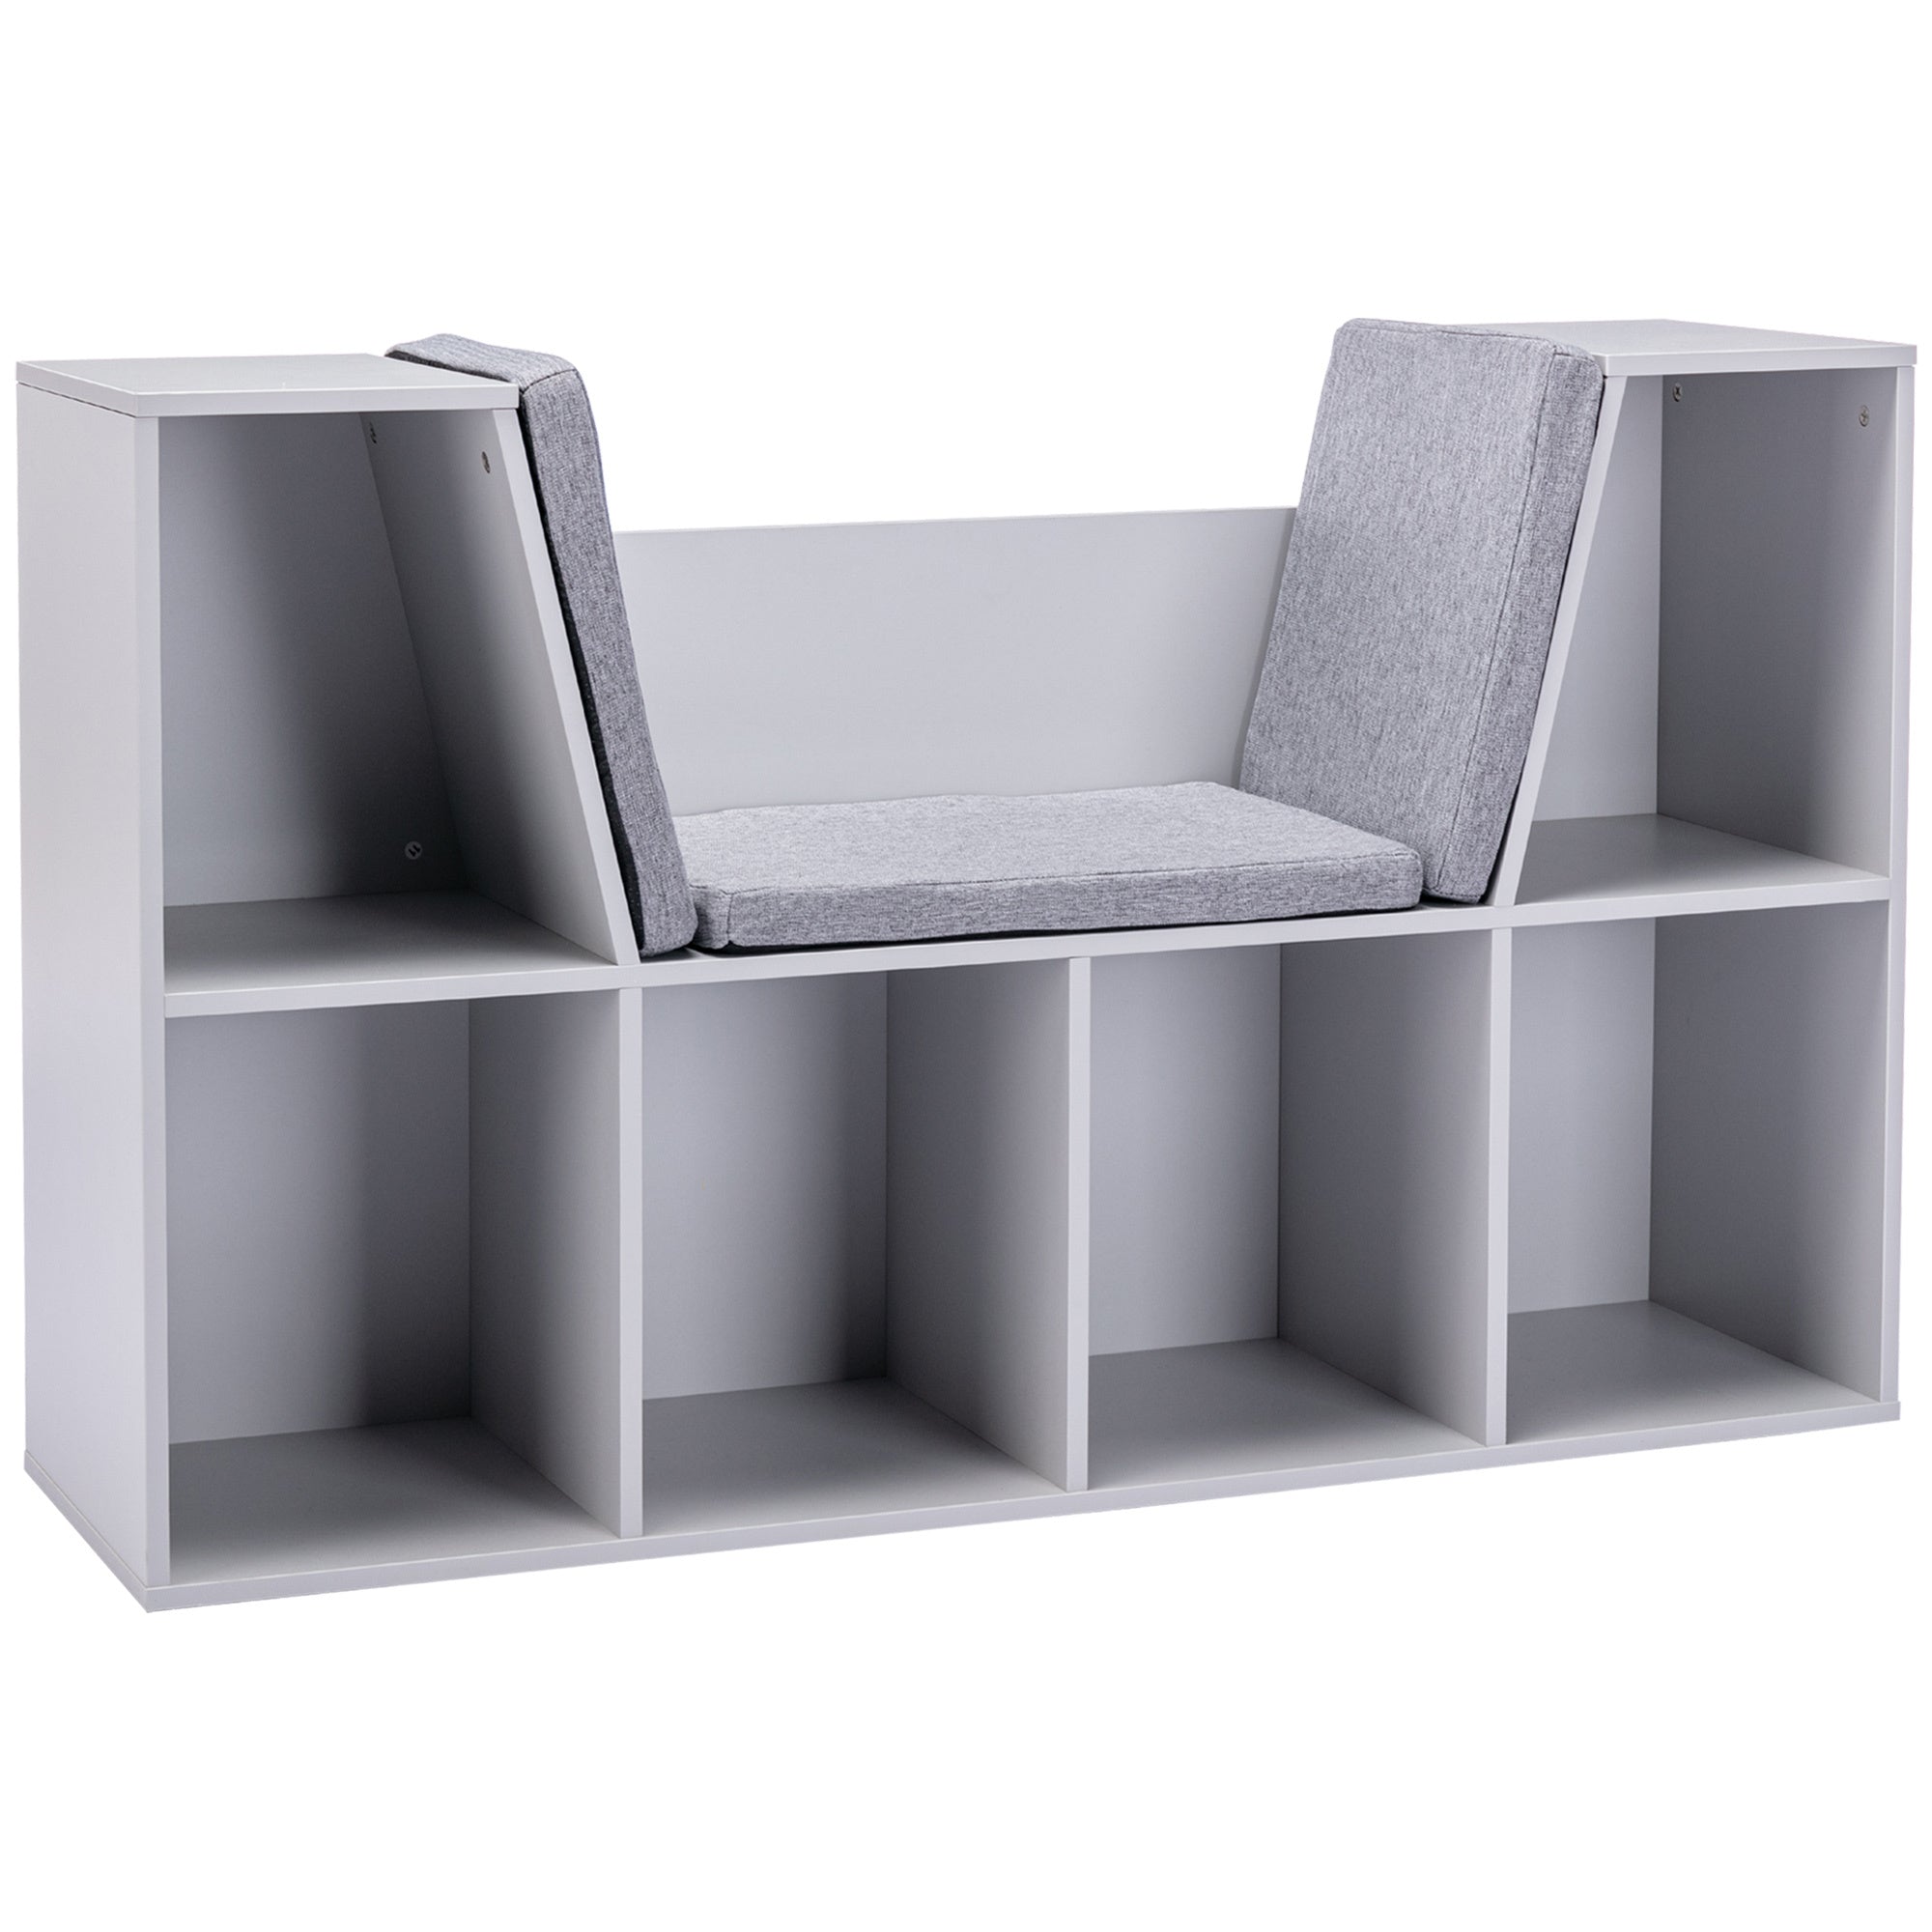 6 Cubby Kids Bookcase with Reading Nook and Cushion gray-mdf